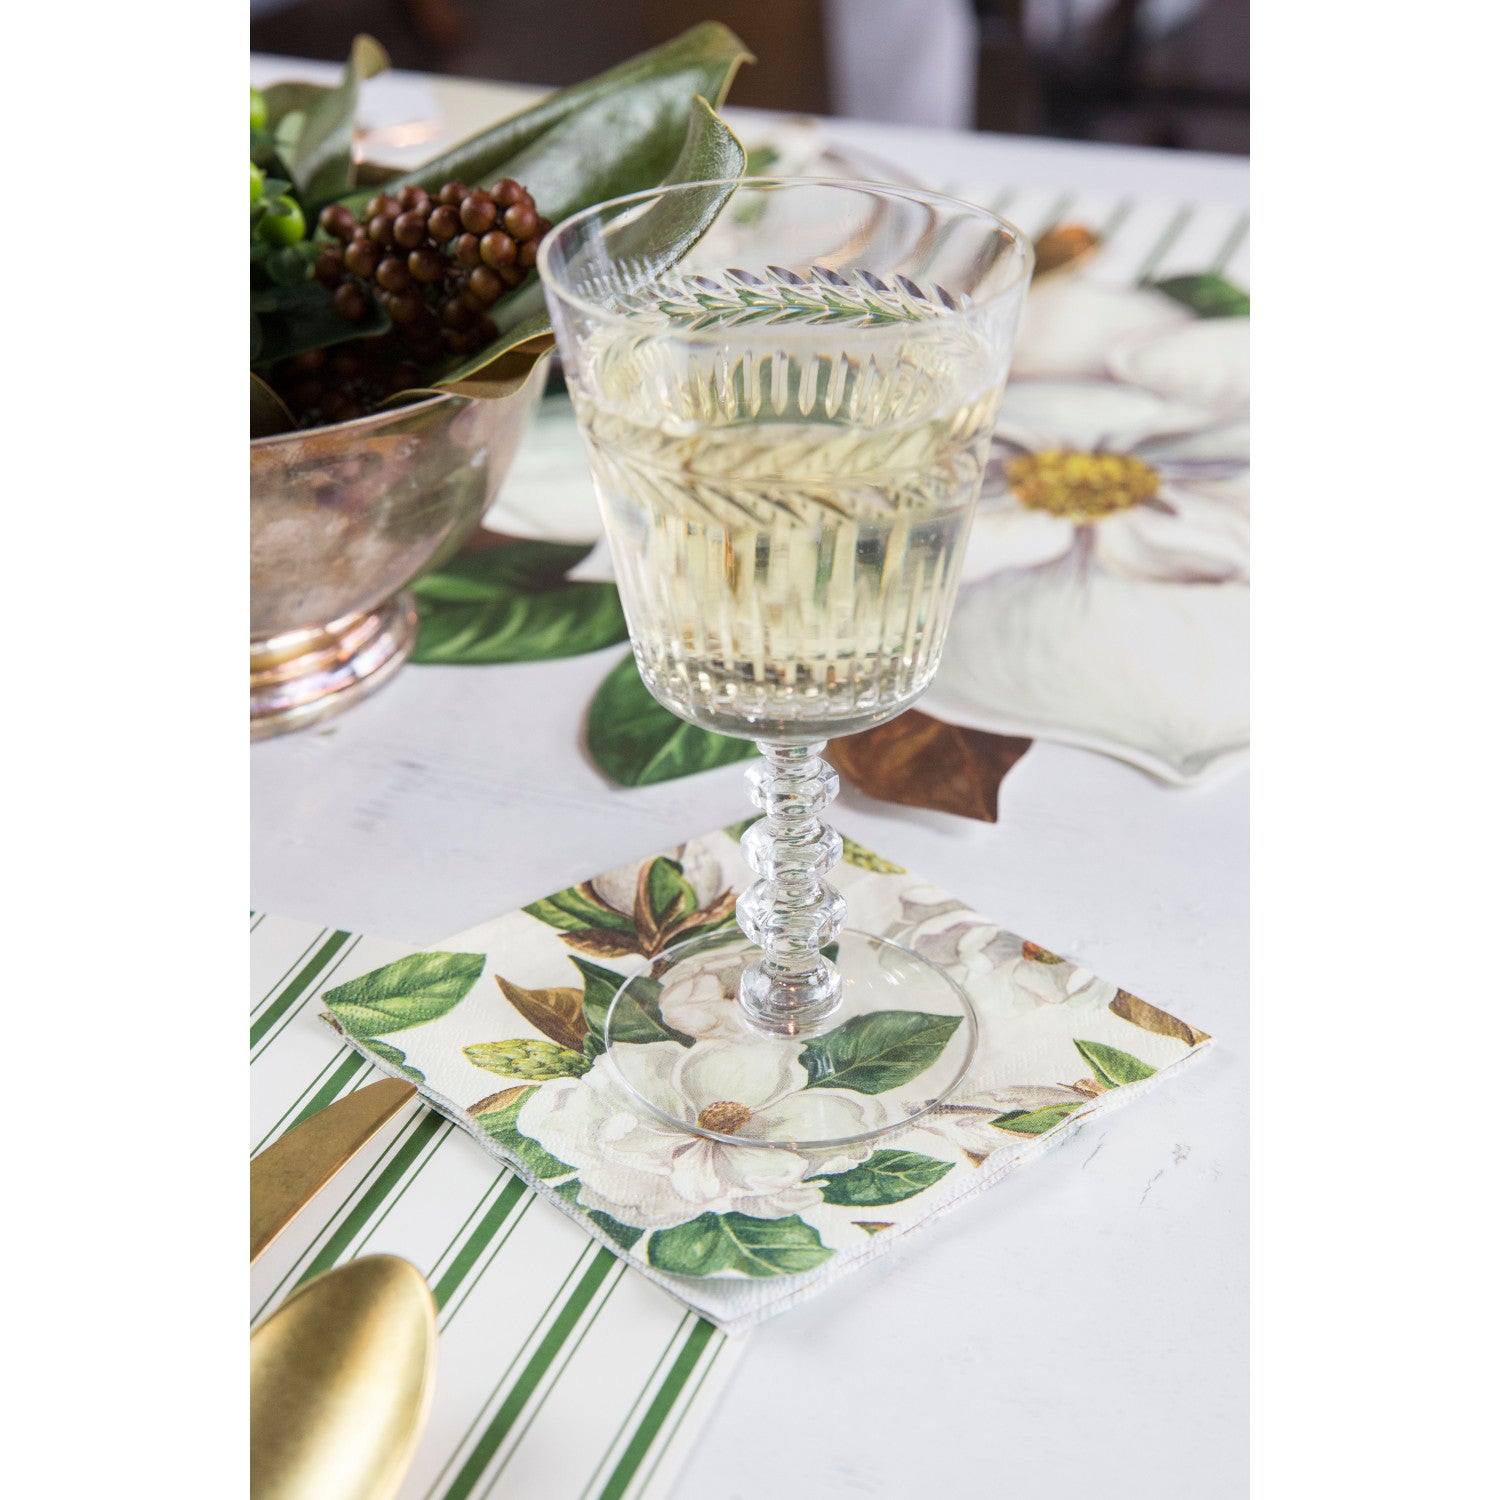 A glass of white wine on a Magnolia Cocktail Napkin, as part of an elegant tablescape.